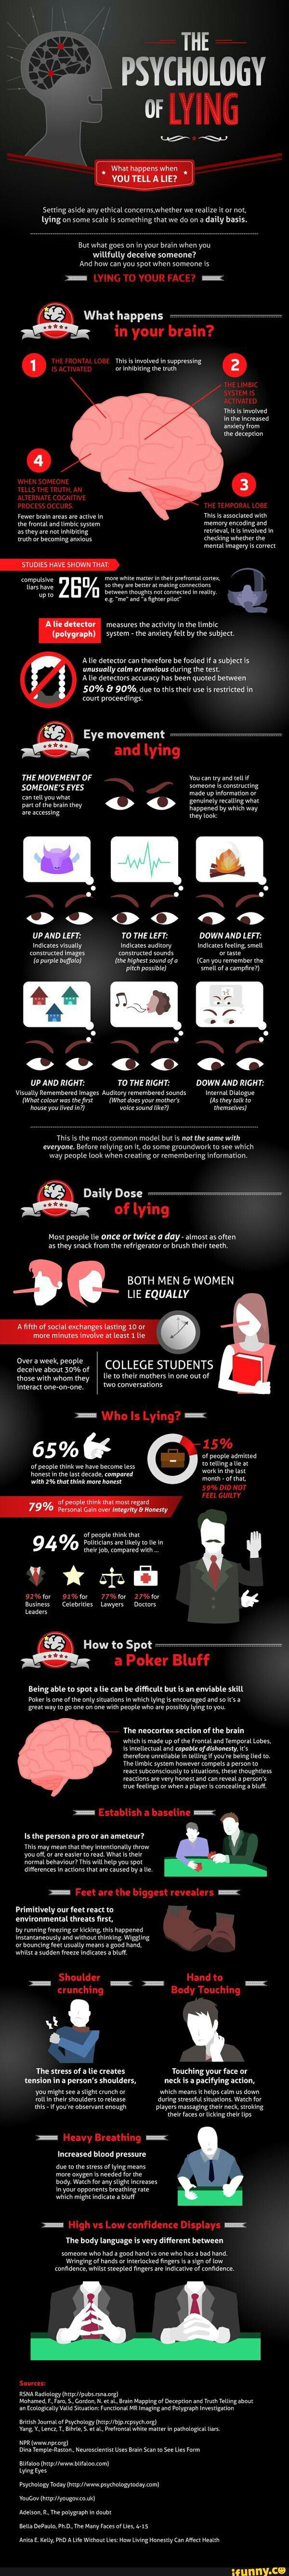 The Psychology Of Lying Infographic